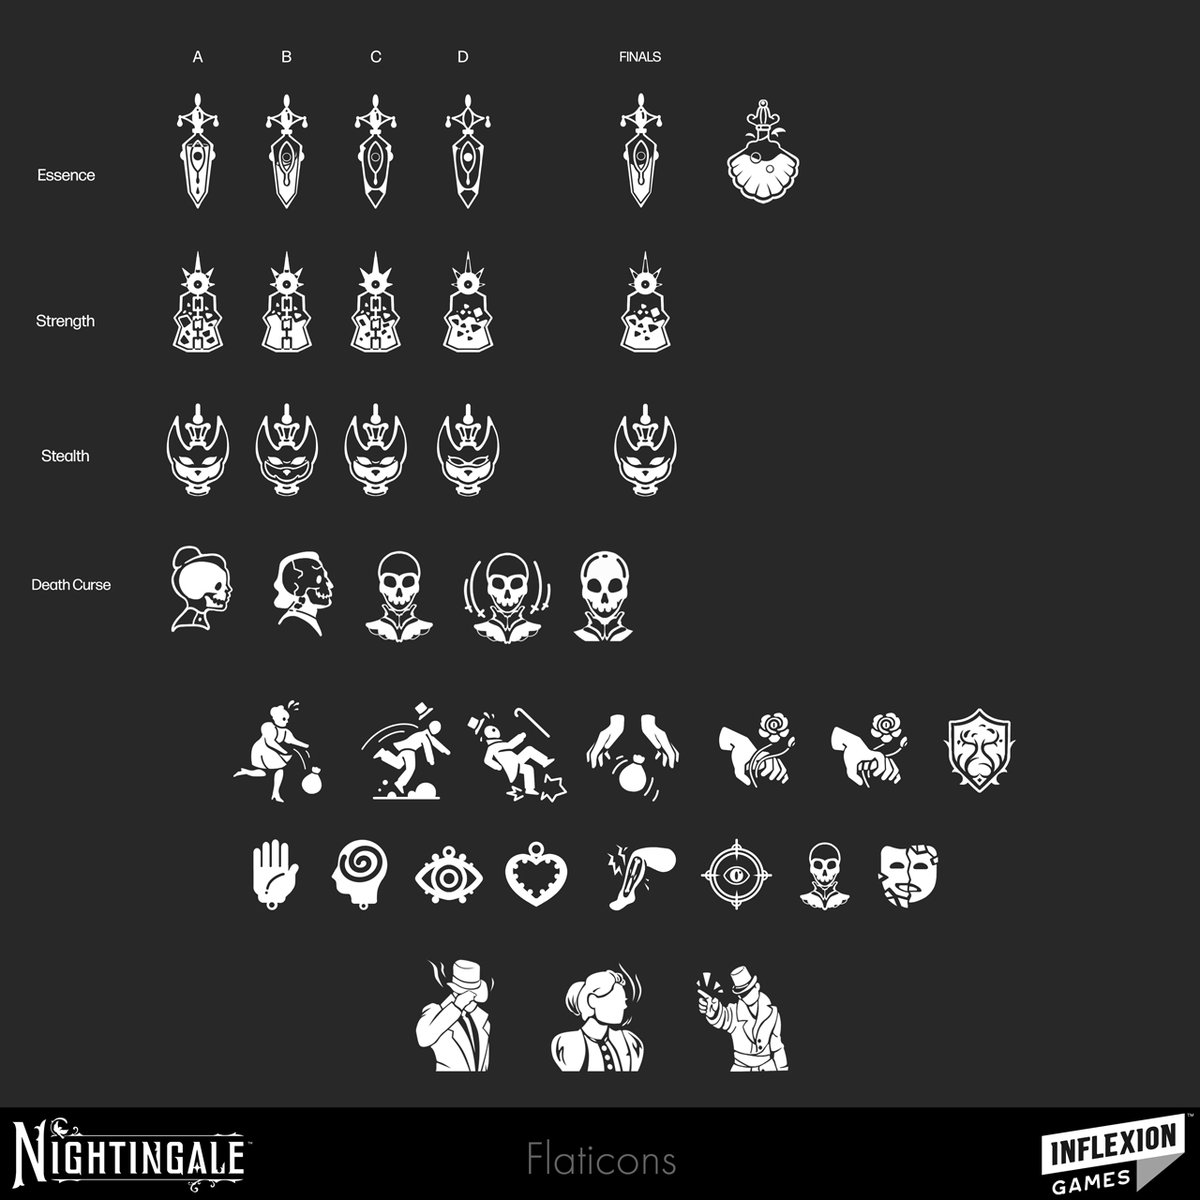 Some of the flaticons I've made for Nightingale, as well as a few iterations! These look simple but getting the balance of shapes and their language right can take many tries, which is where my background in concept design really came in handy.